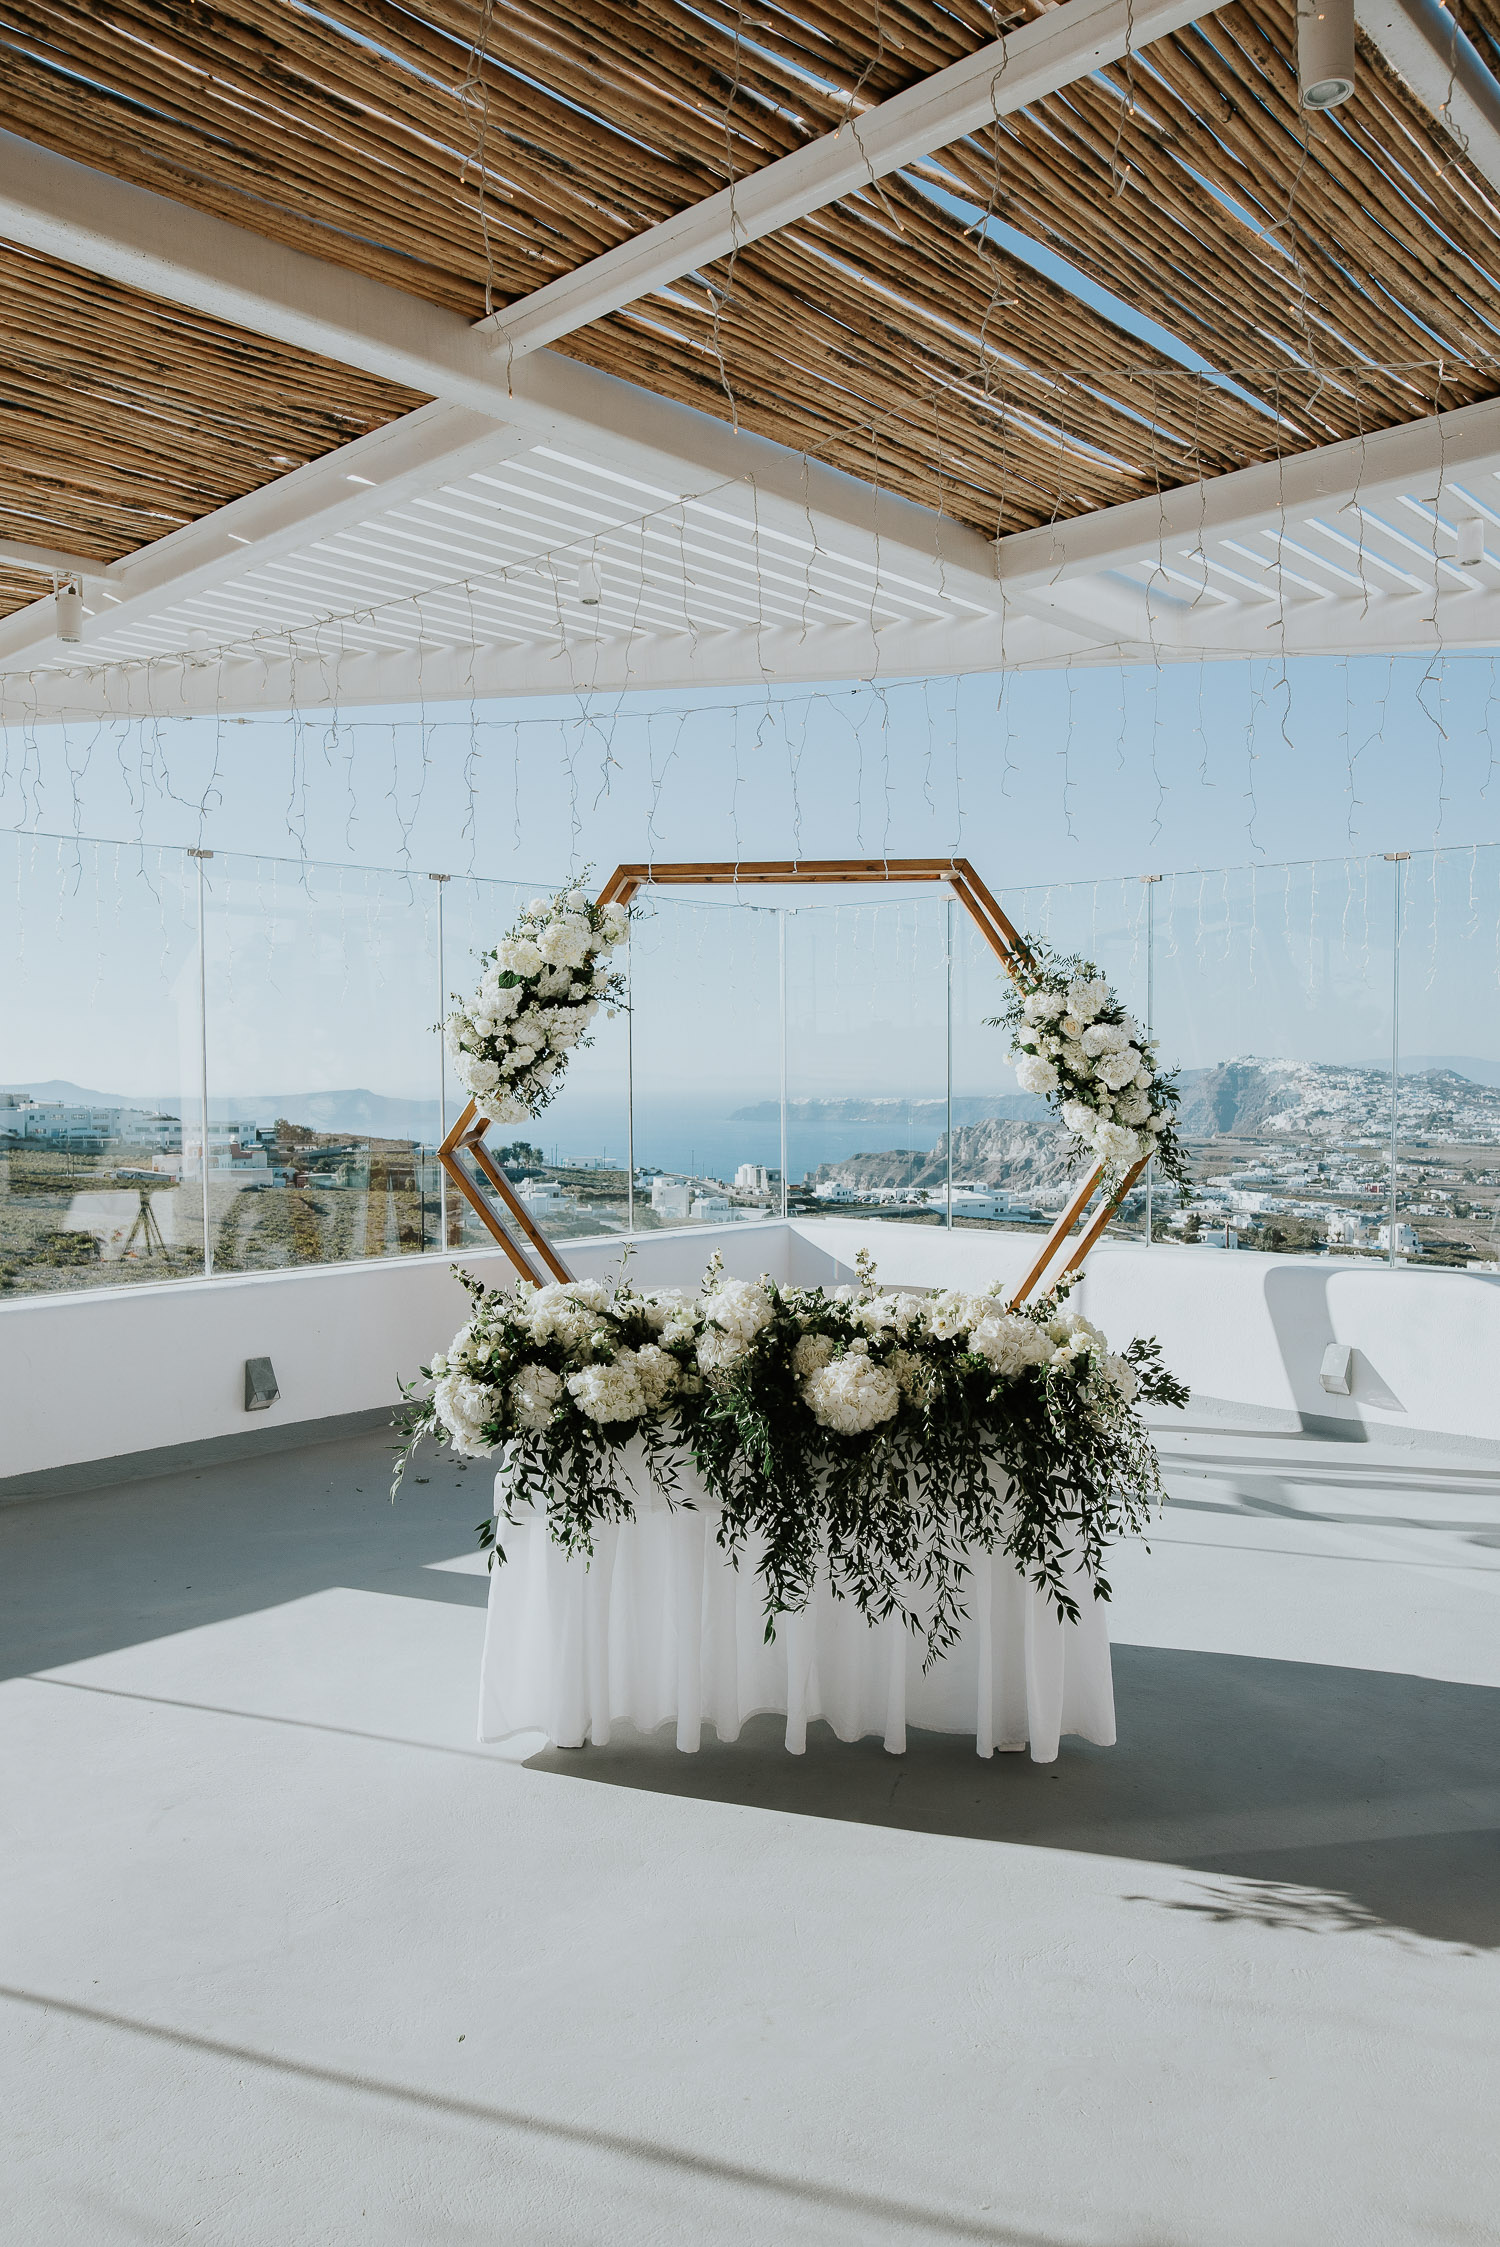 Wedding photographer Santorini: hexagonal wedding arch and the bridal table adorned in floral arrangements basked in the afternoon light by Ben and Vesna.